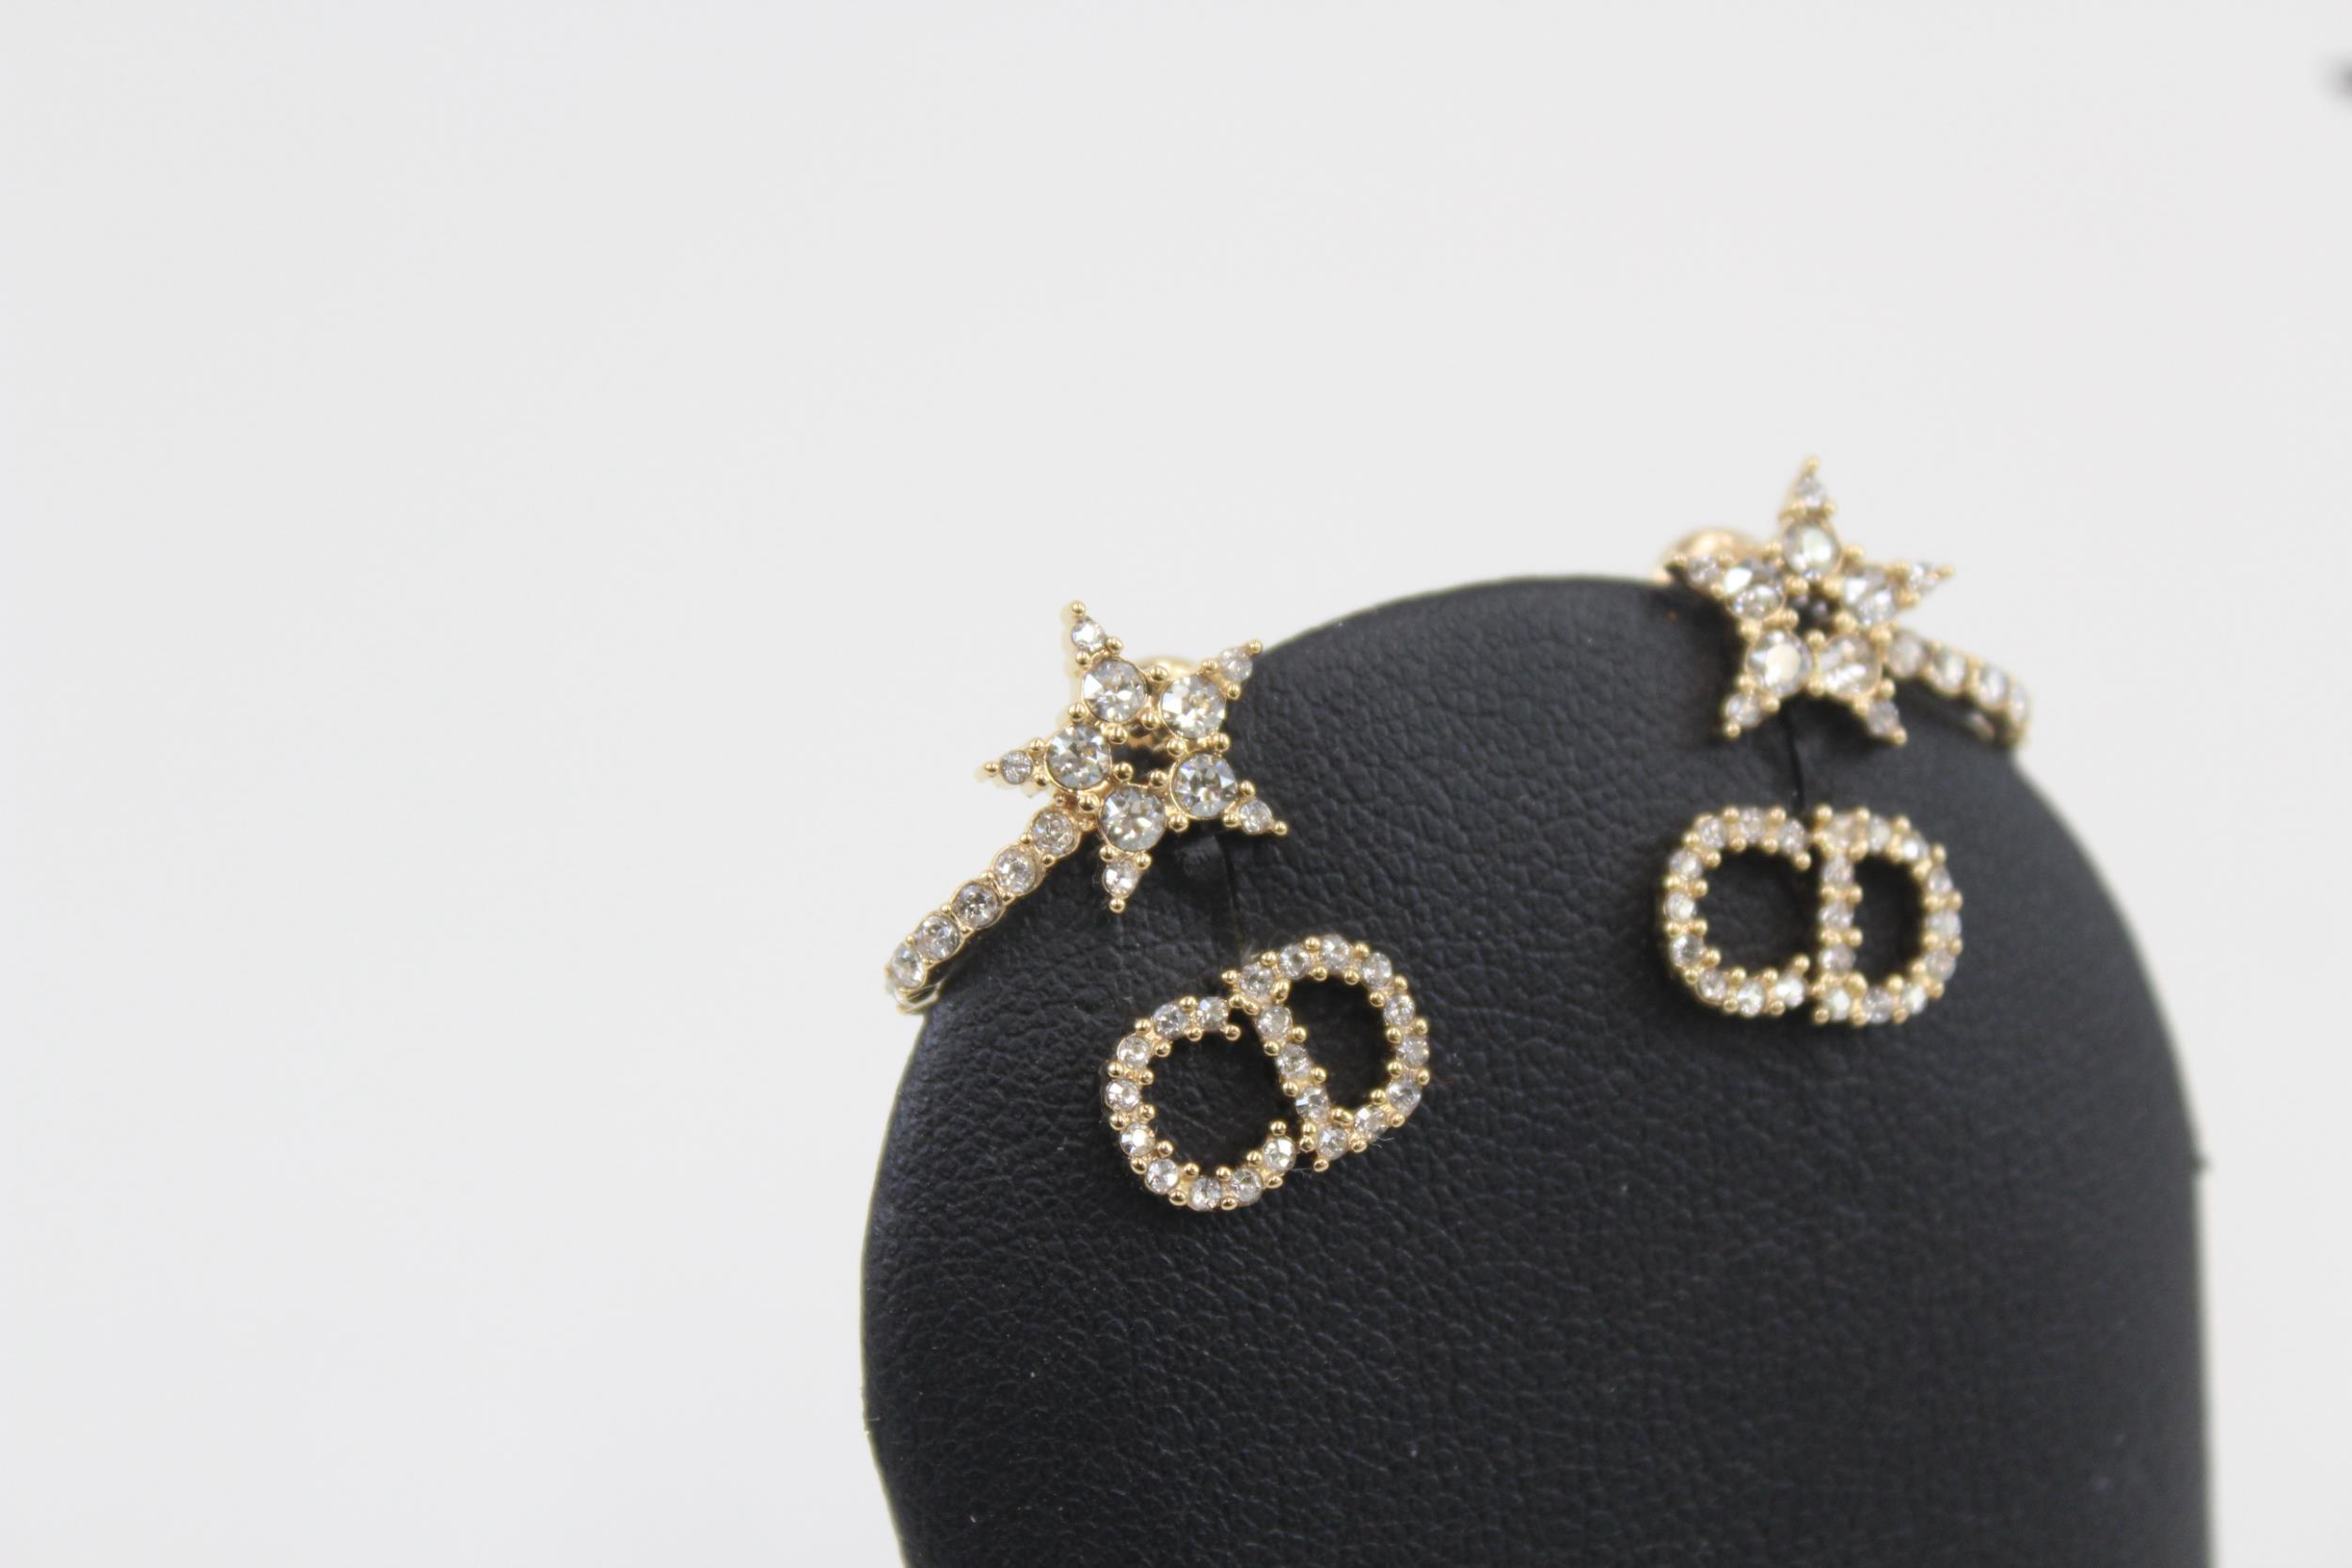 Pair of gold tone rhinestone earrings by designer Christian Dior with pouch (3g) - Image 3 of 7